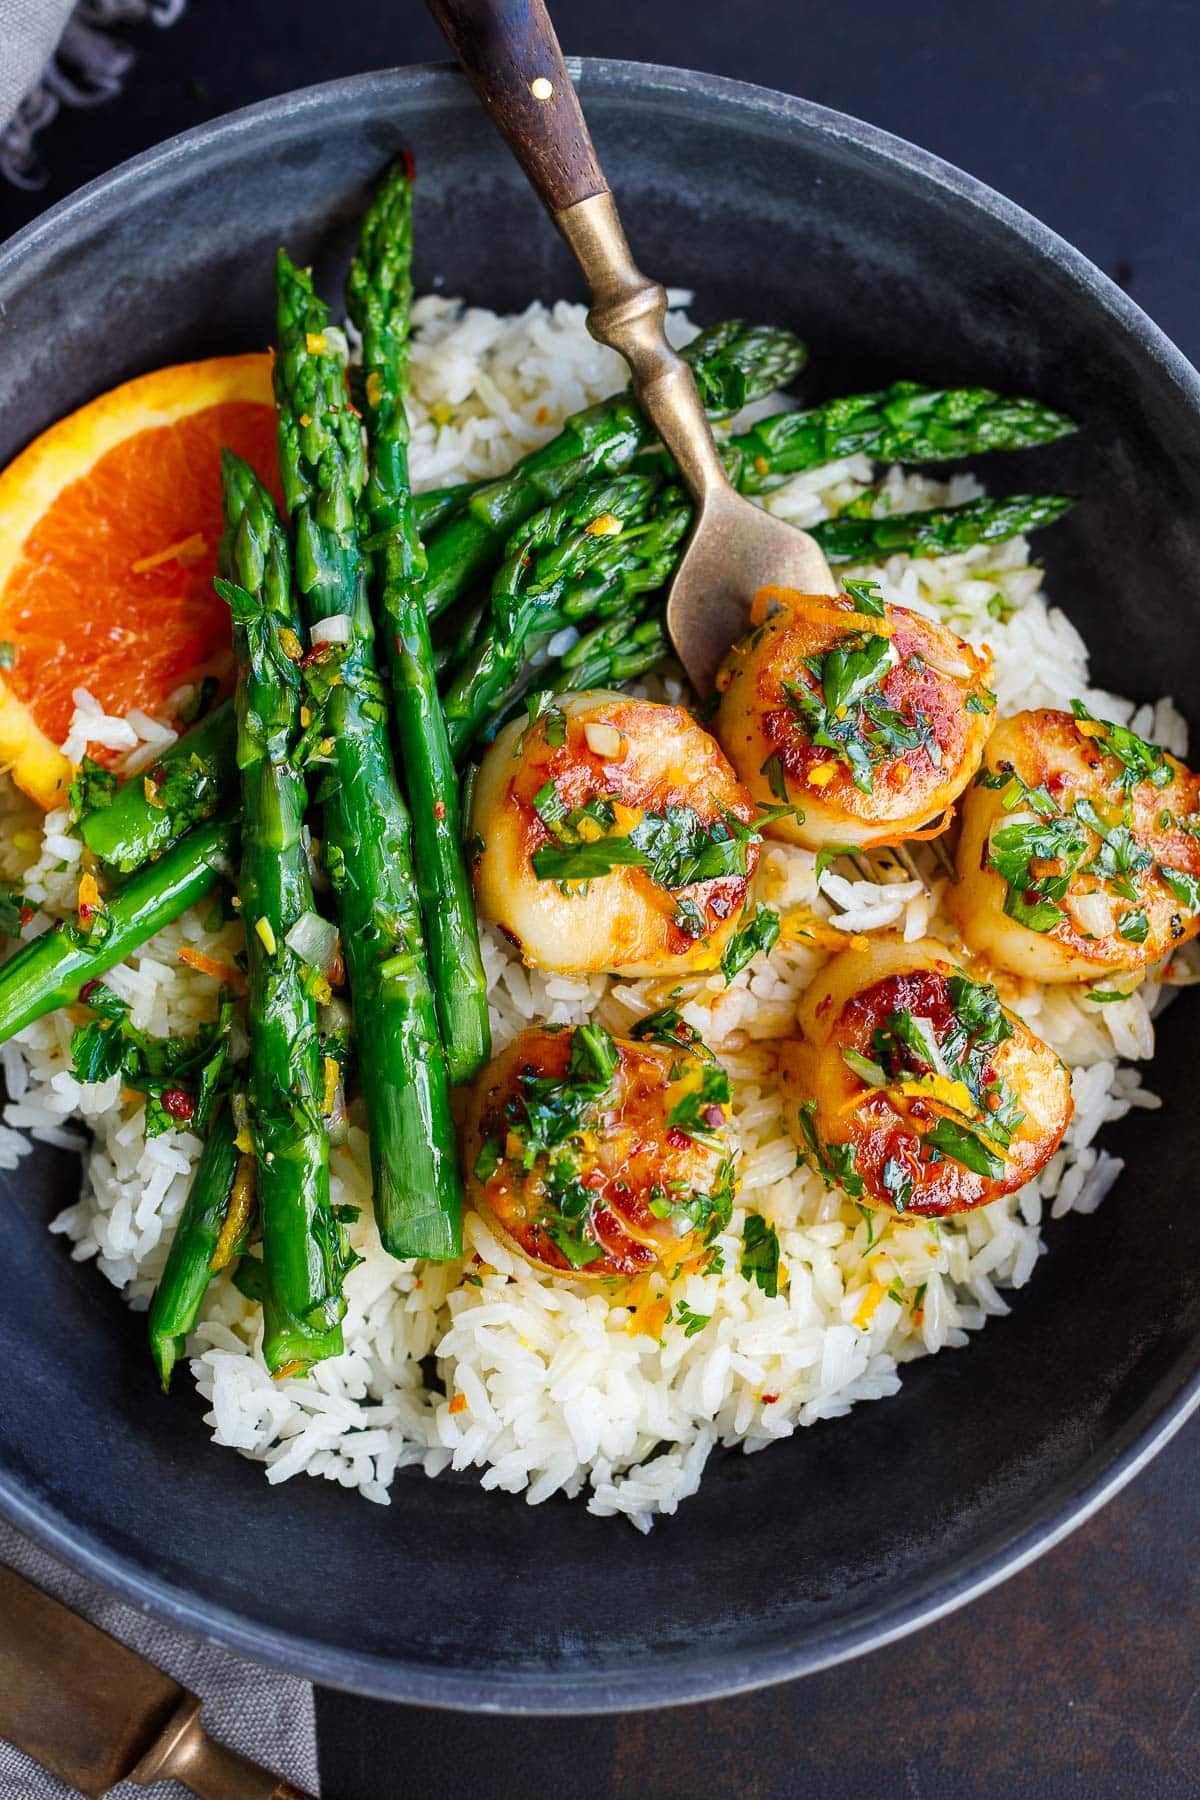 seared scallops with citrus dressing served over rice with asparagus.